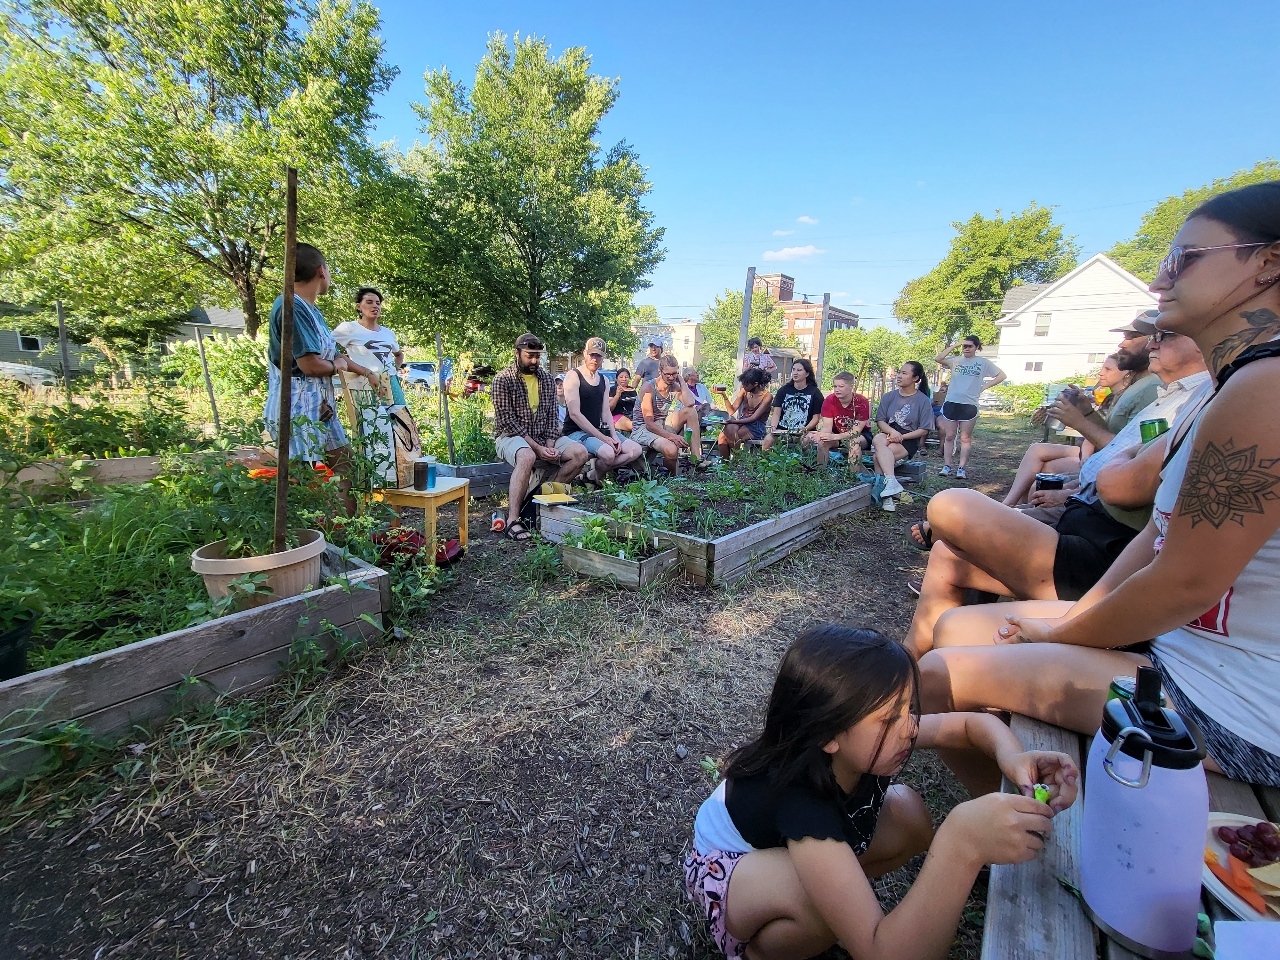 People circled in community garden